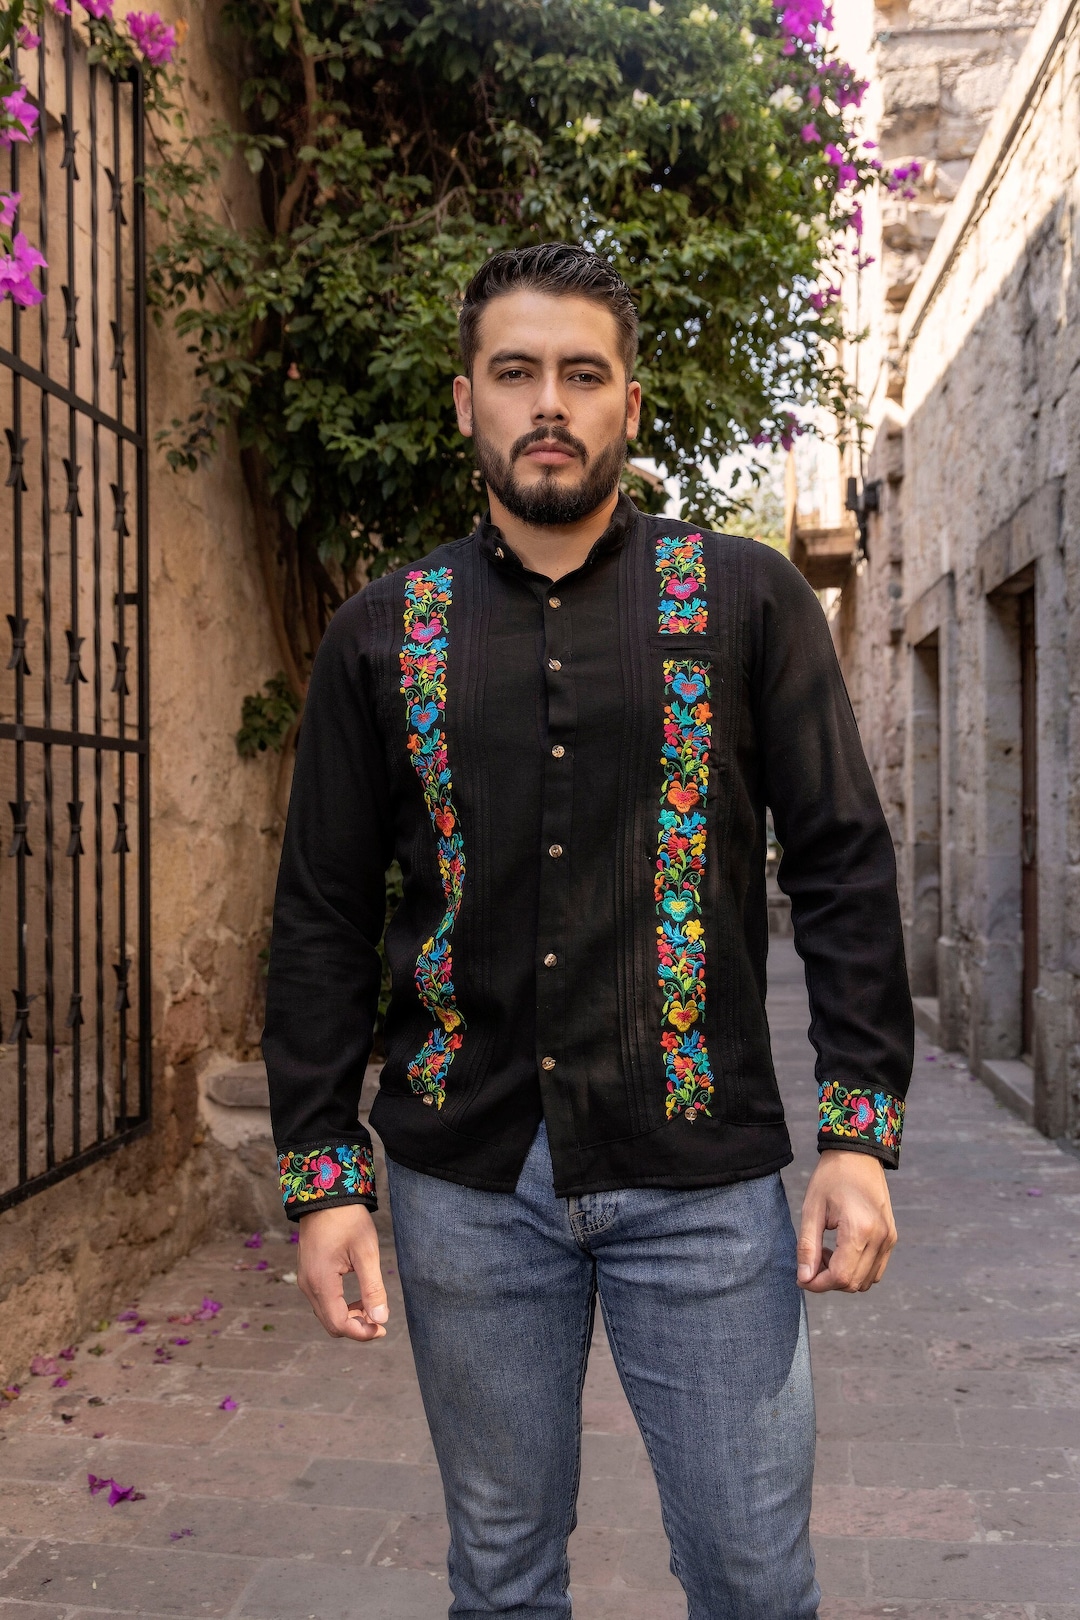 Mens Mexican Traditional Shirt. Floral Embroidered Guayabera for Men ...